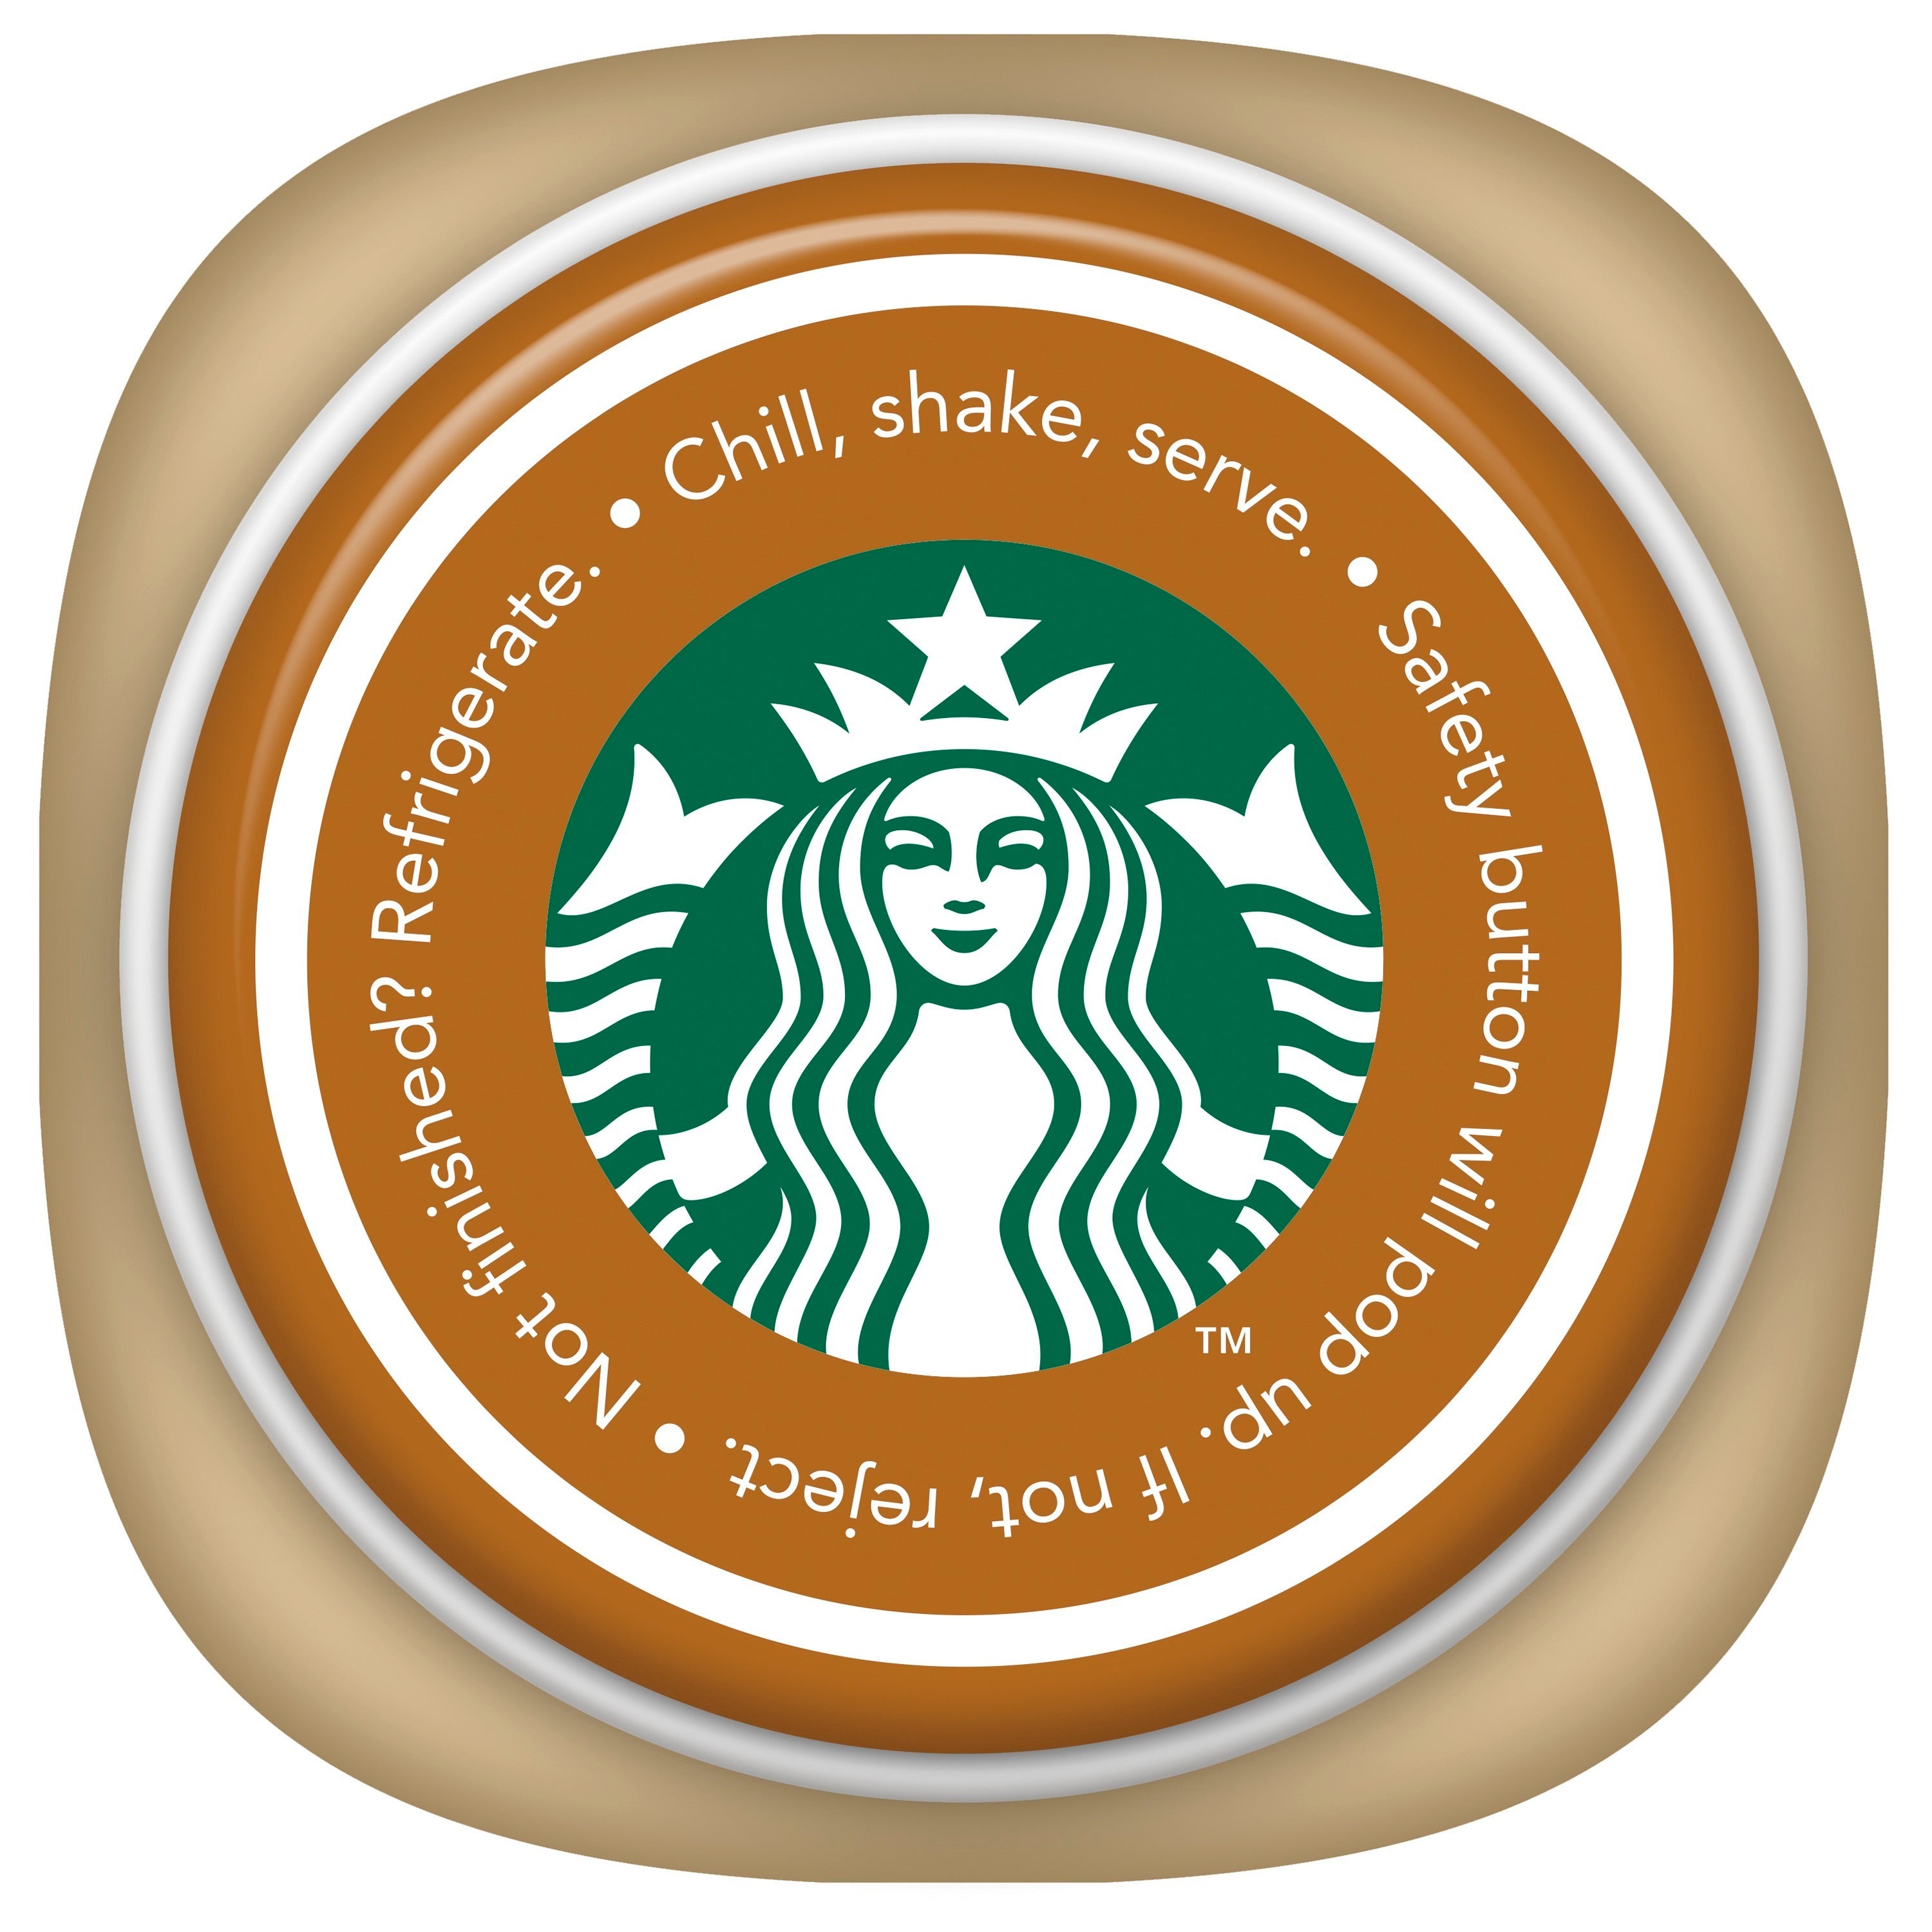 BEVERAGE - Starbucks, Frappuccino, Caramel Flavored, Chilled Coffee Drink